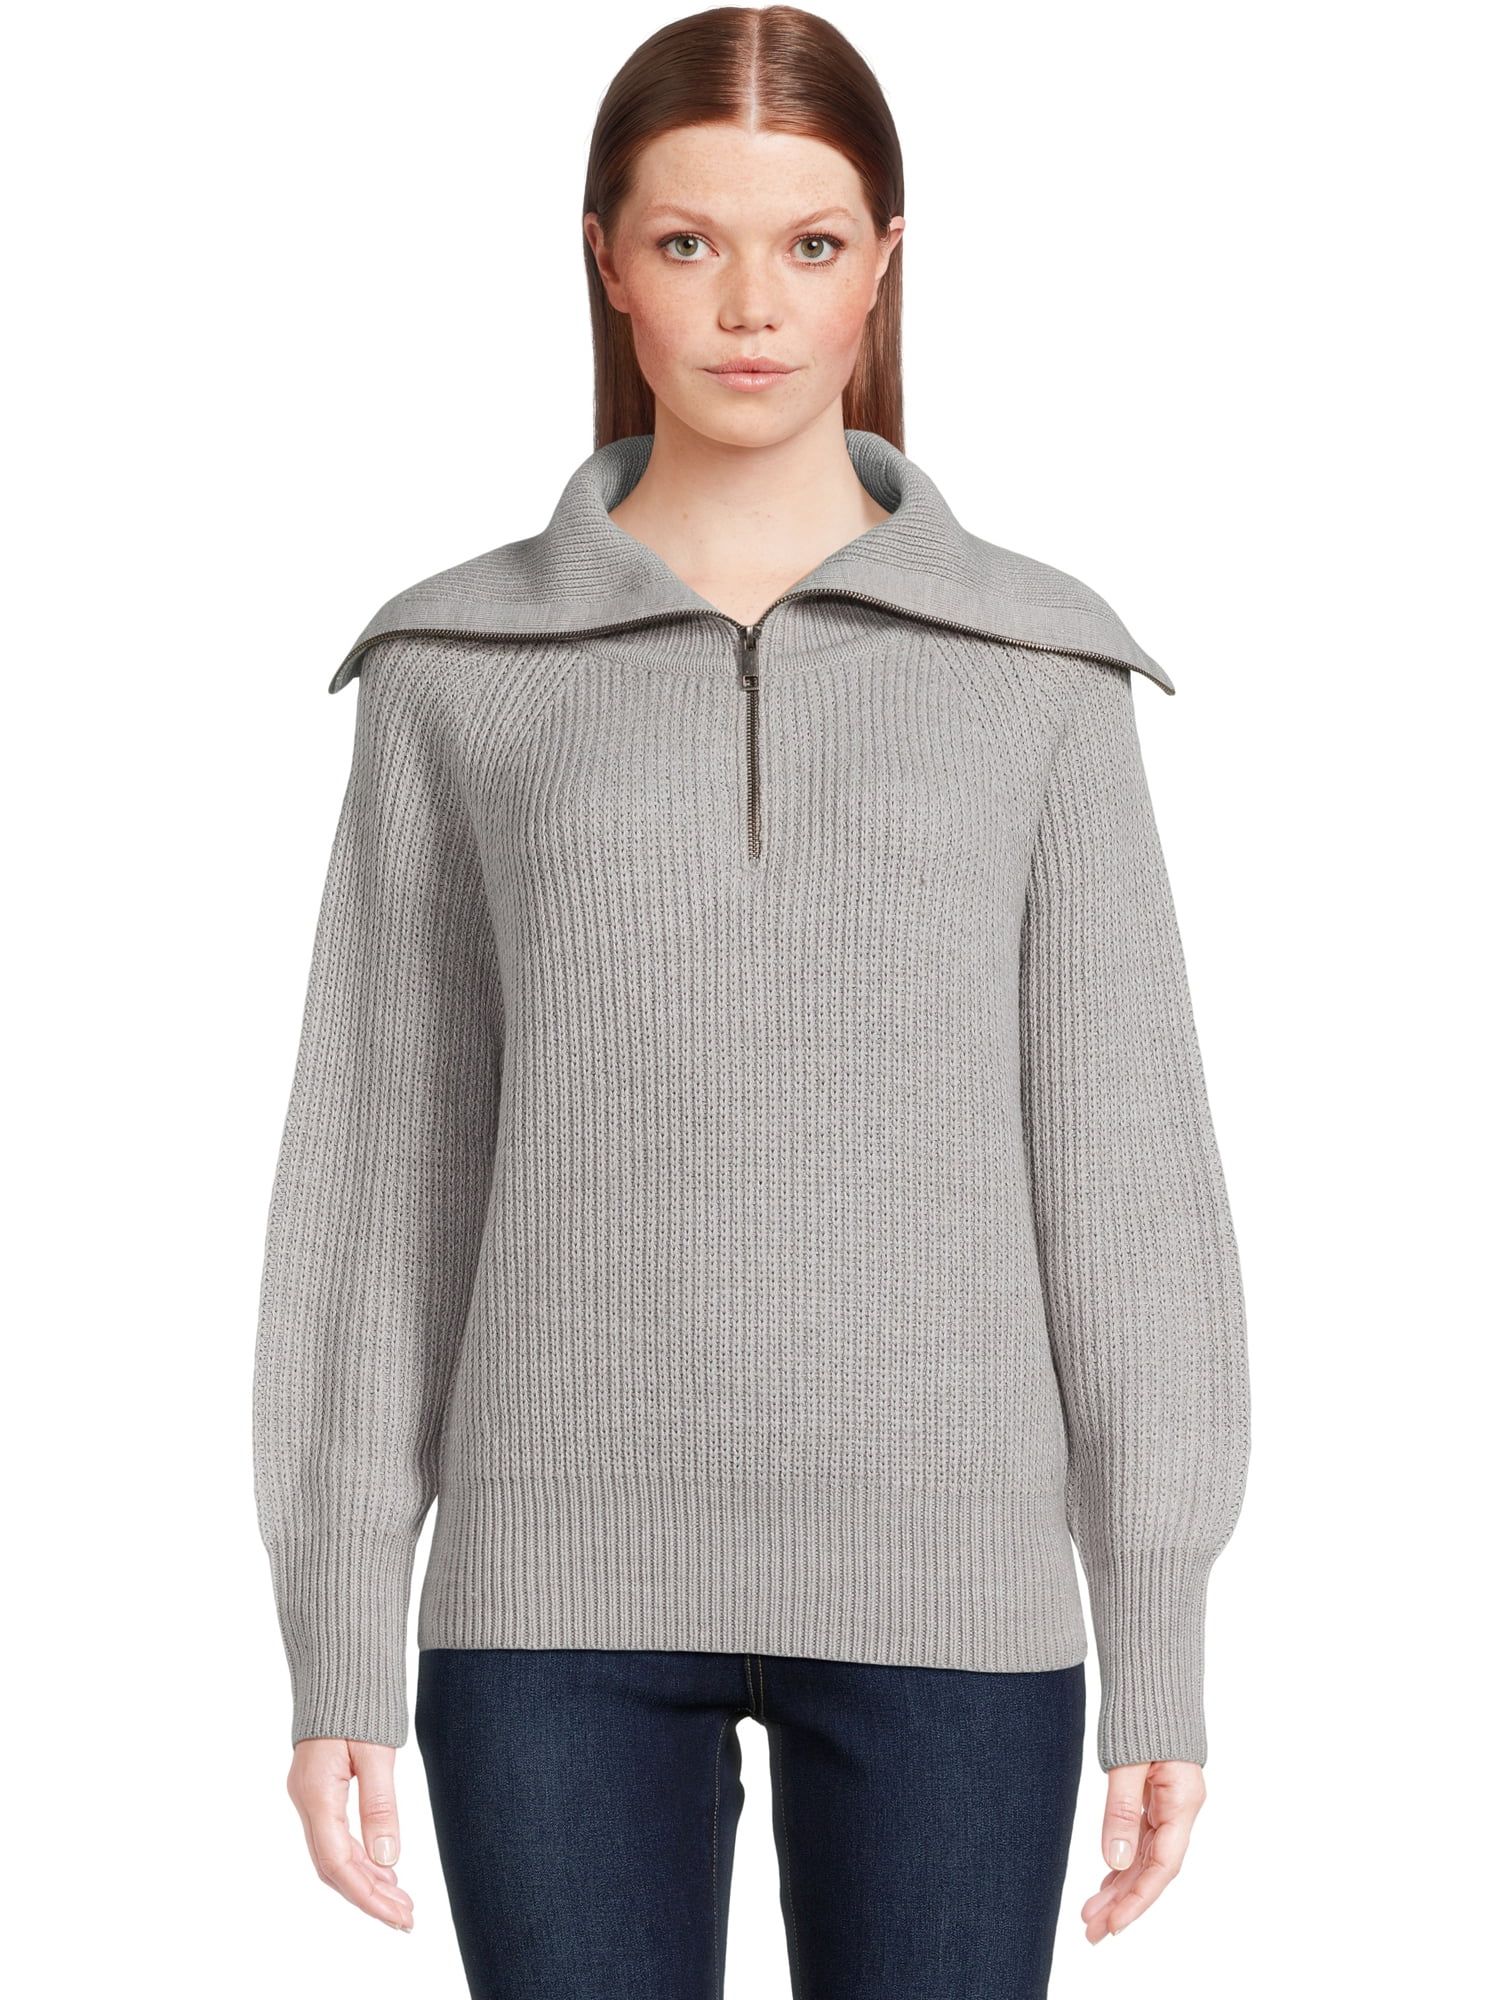 RD Style Women’s Quarter Zip Sweater with Extended Collar, Midweight, Sizes XS-3XL | Walmart (US)